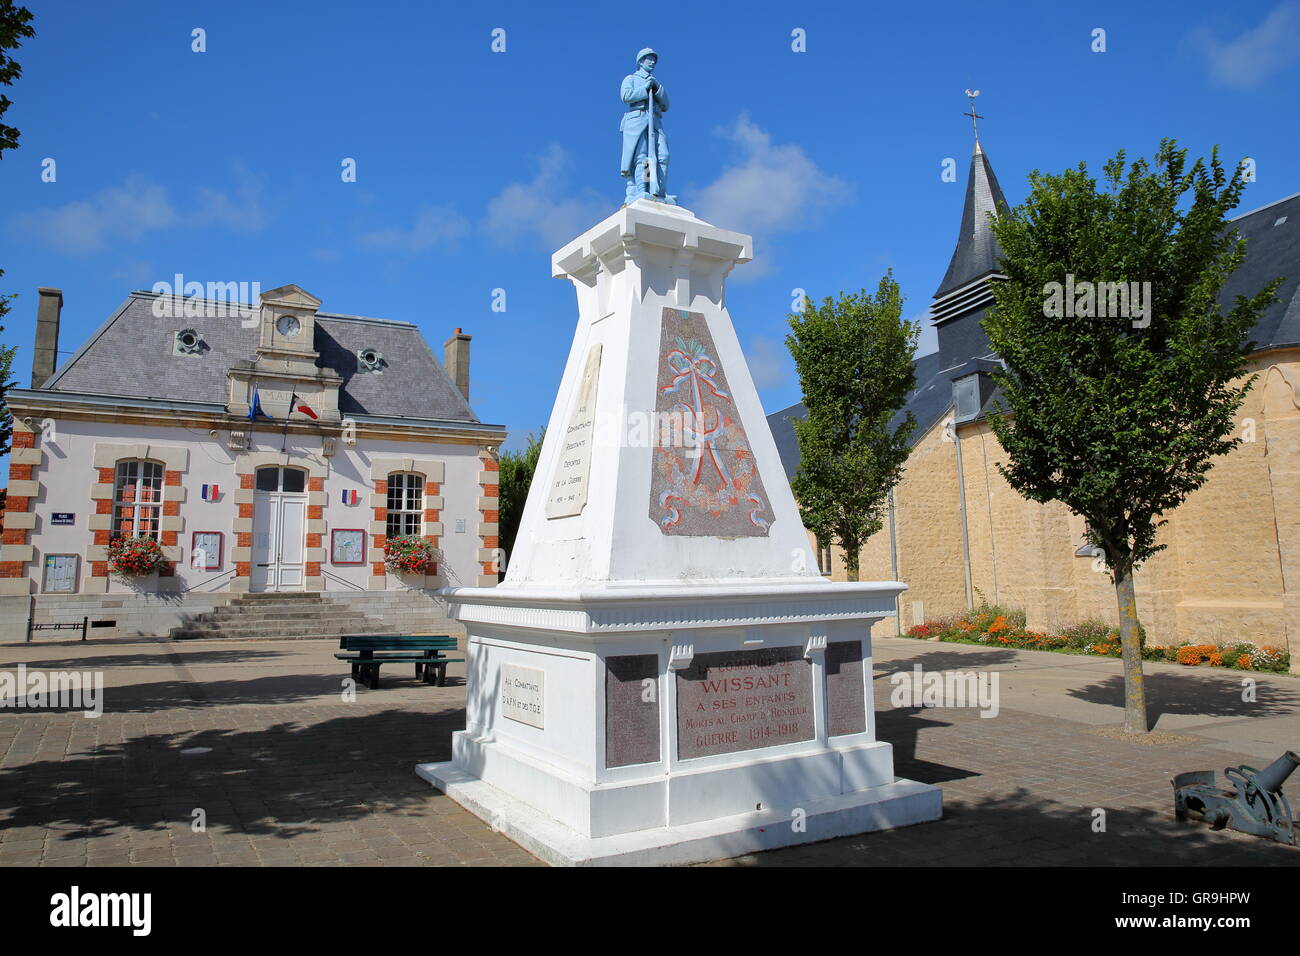 Town square with city hall and World War II memorial in Wissant, Cote d'Opale, Pas-de-Calais, France Stock Photo